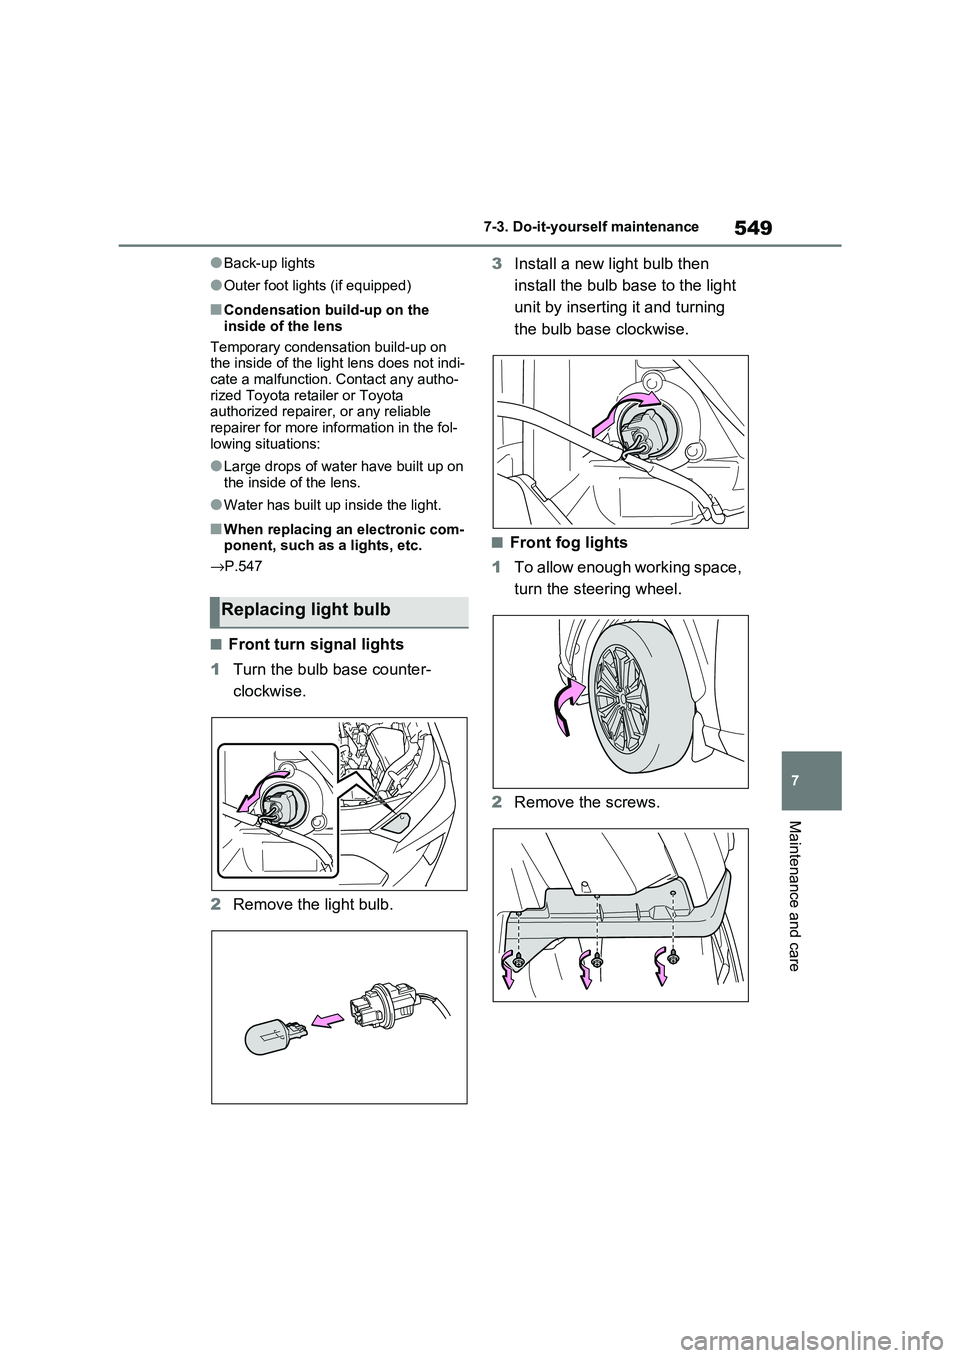 TOYOTA RAV4 PHEV 2021  Owners Manual 549
7 
7-3. Do-it-yours elf maintenance
Maintenance and care
●Back-up lights
●Outer foot lights (if equipped)
■Condensation build-up on the  
inside of the lens 
Temporary condensation build-up 